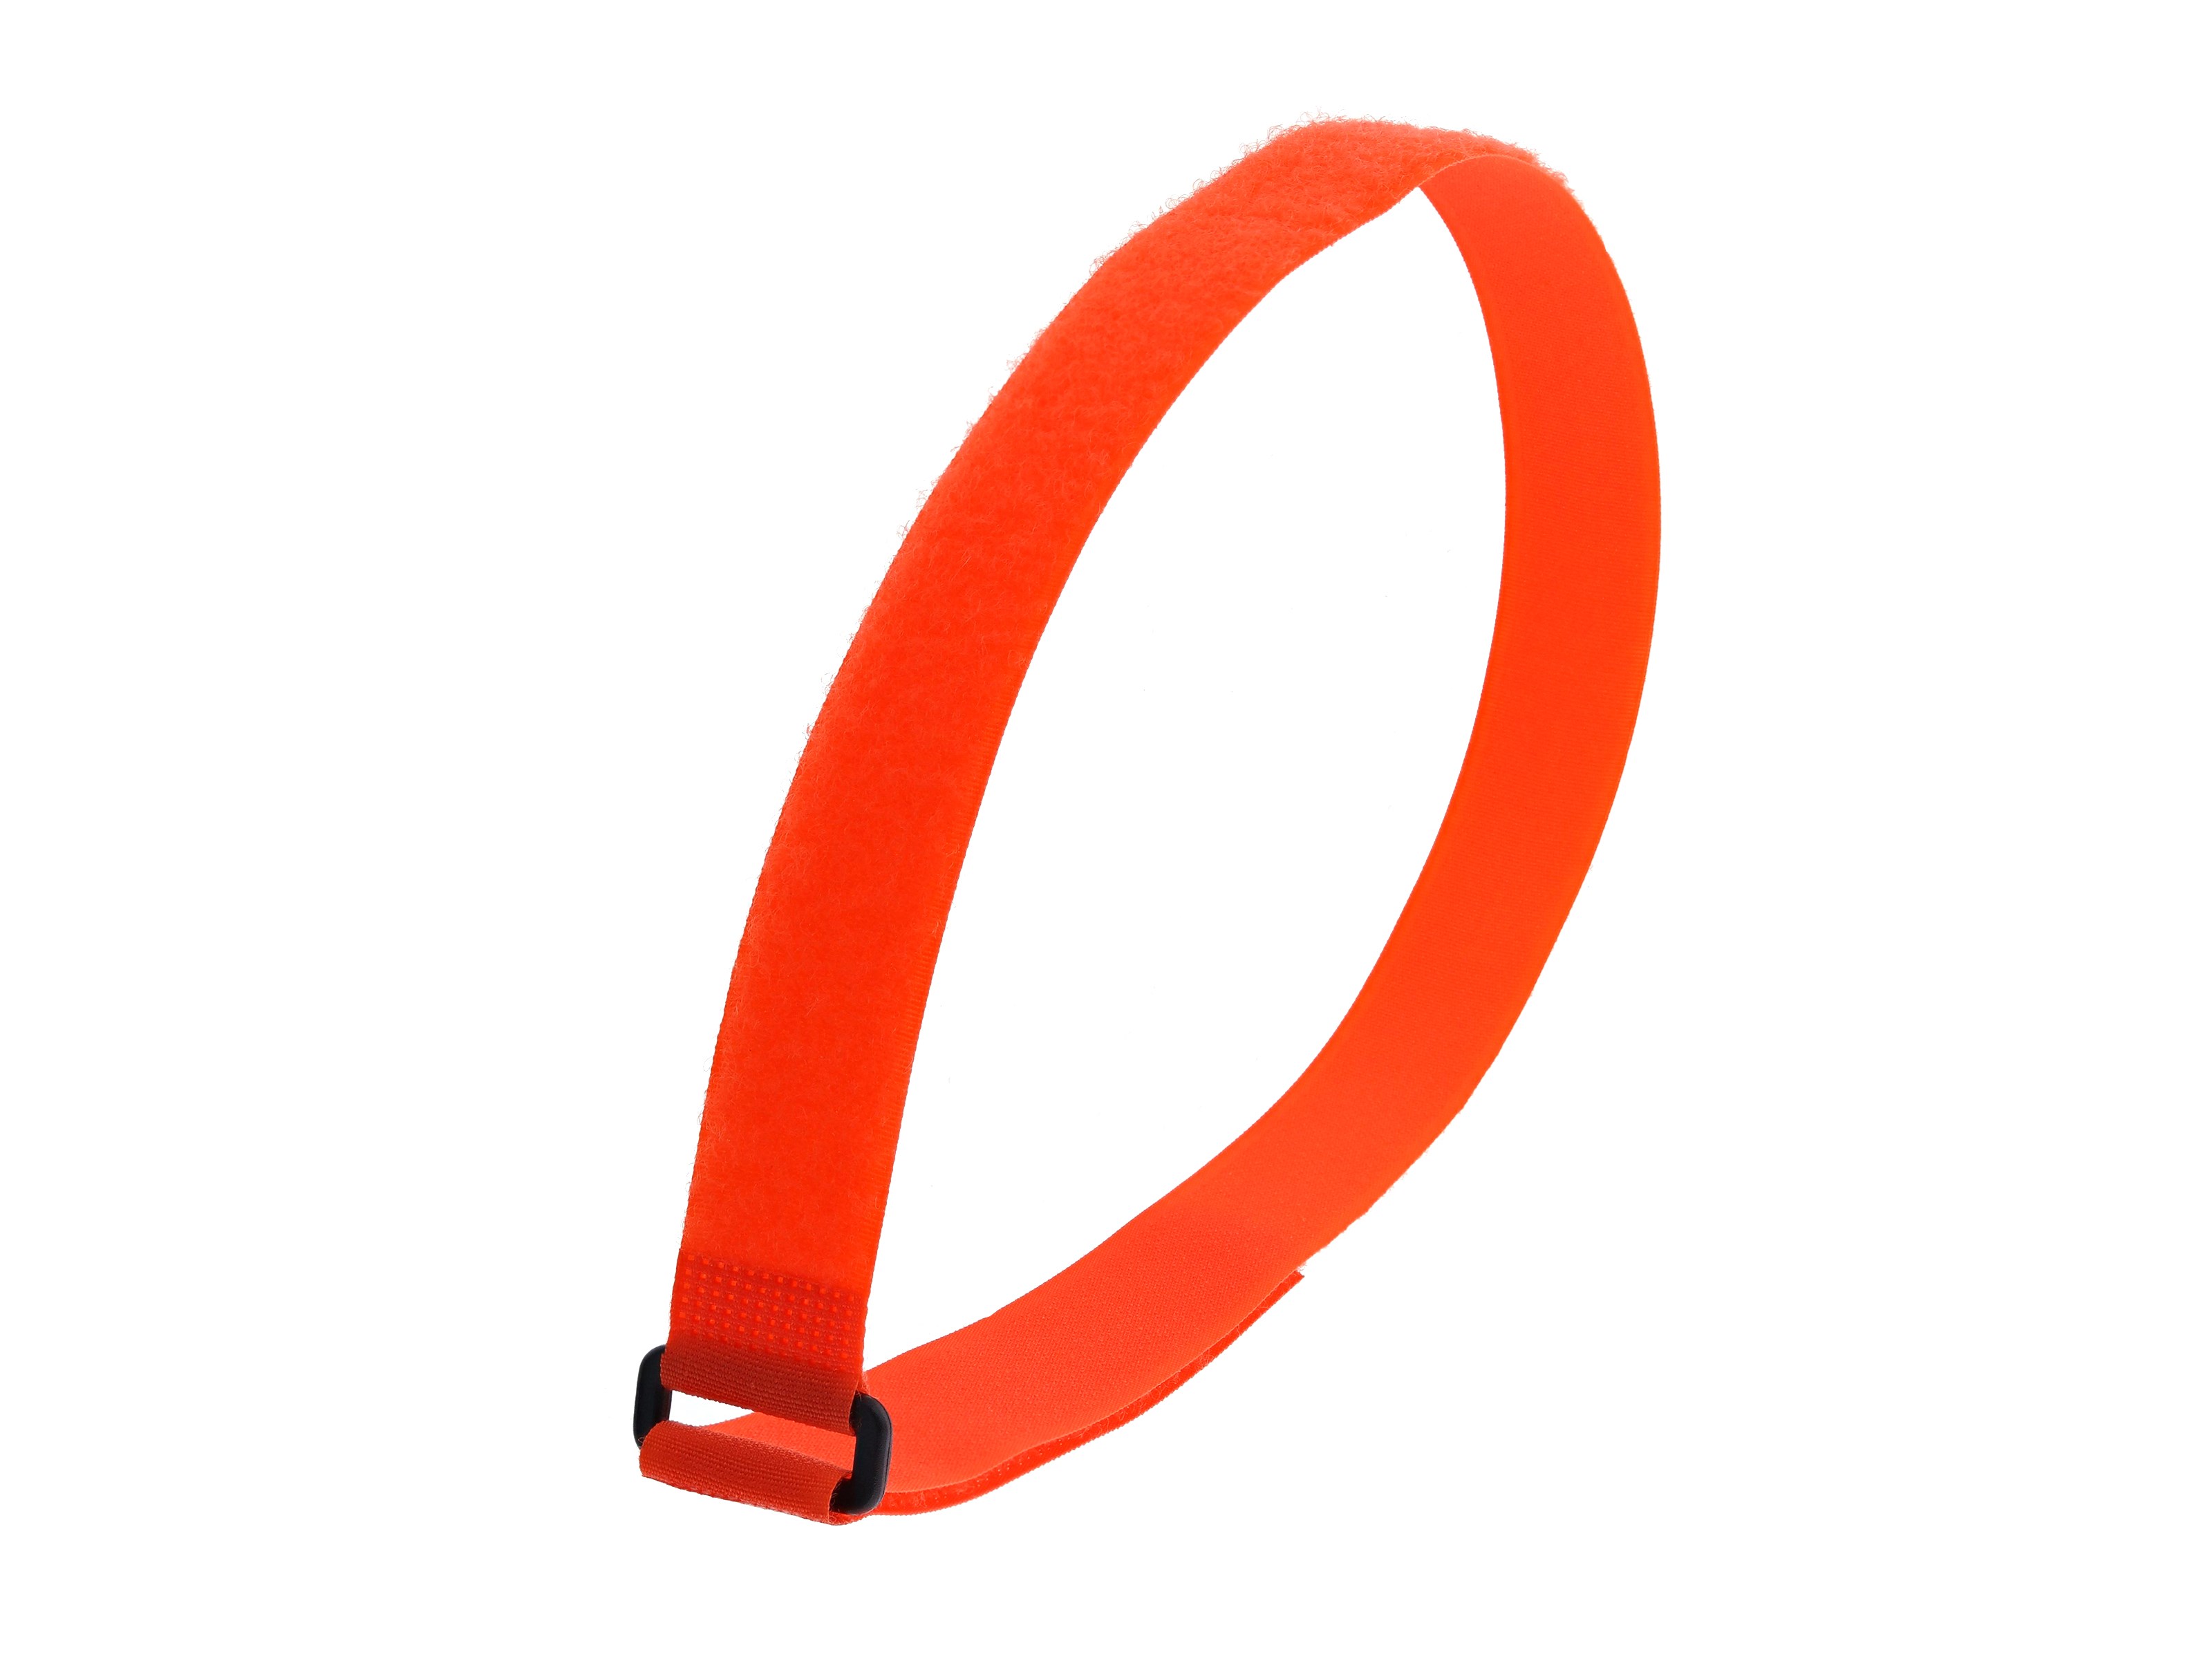 30 x 1 Inch Orange Cinch Straps - 2 Pack - Secure™ Cable Ties